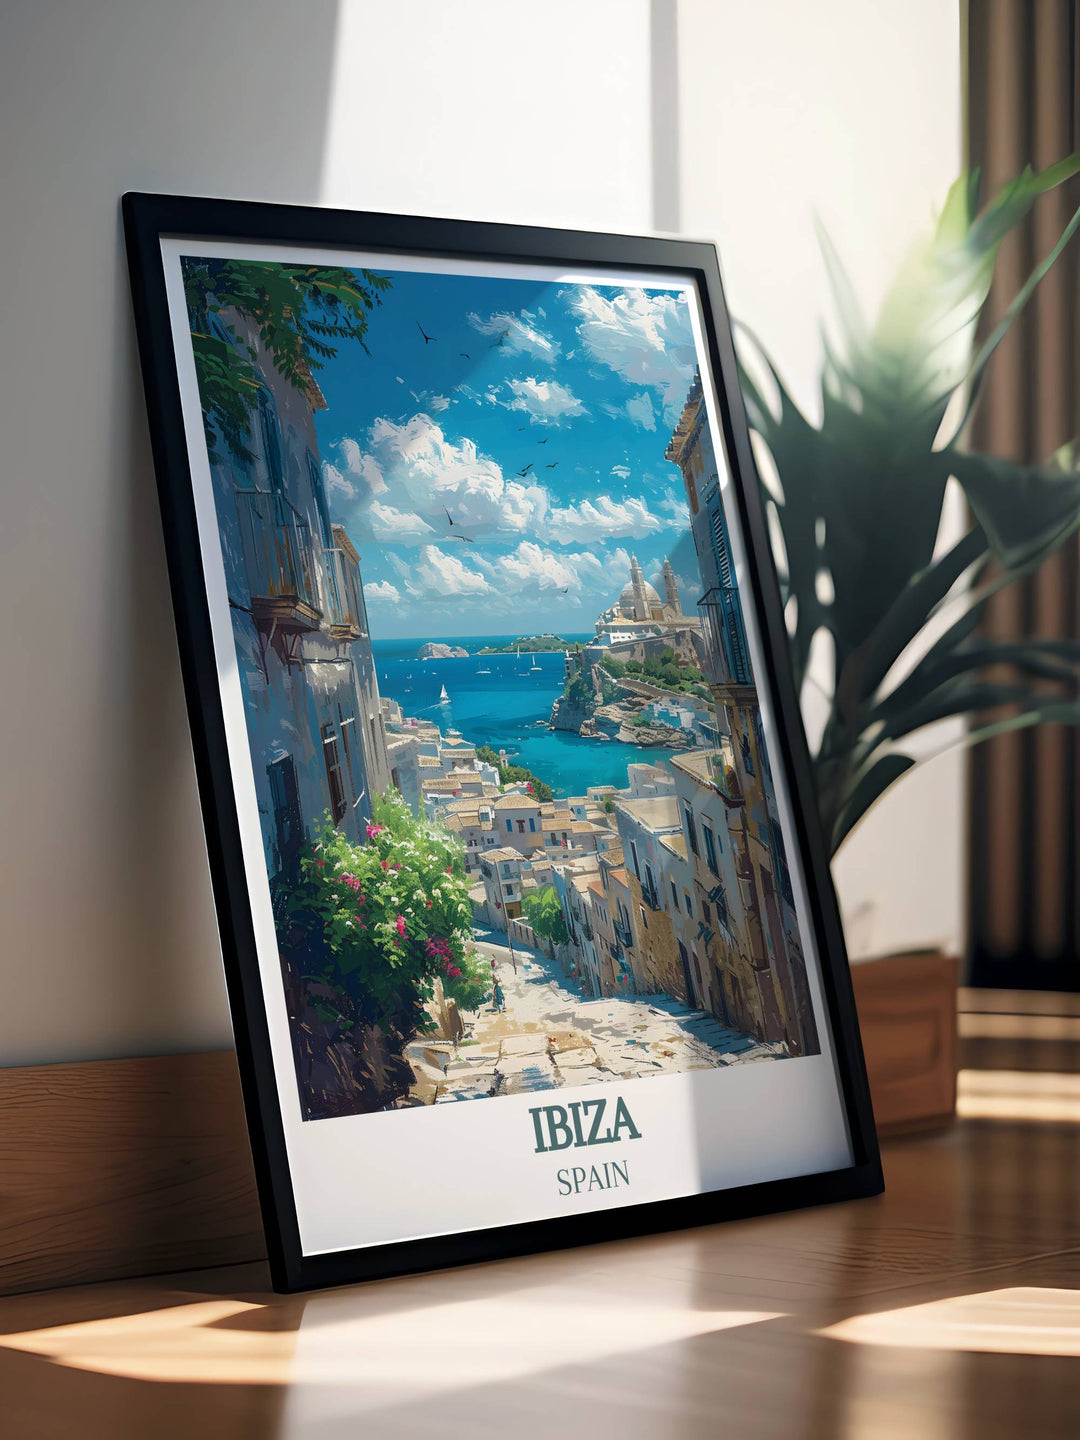 Ibiza Spain Print featuring the famous Ocean Beach Club and the historical Dalt Vila Ibiza Old Town capturing the dual essence of Ibizas energetic club life and rich cultural heritage perfect for any room